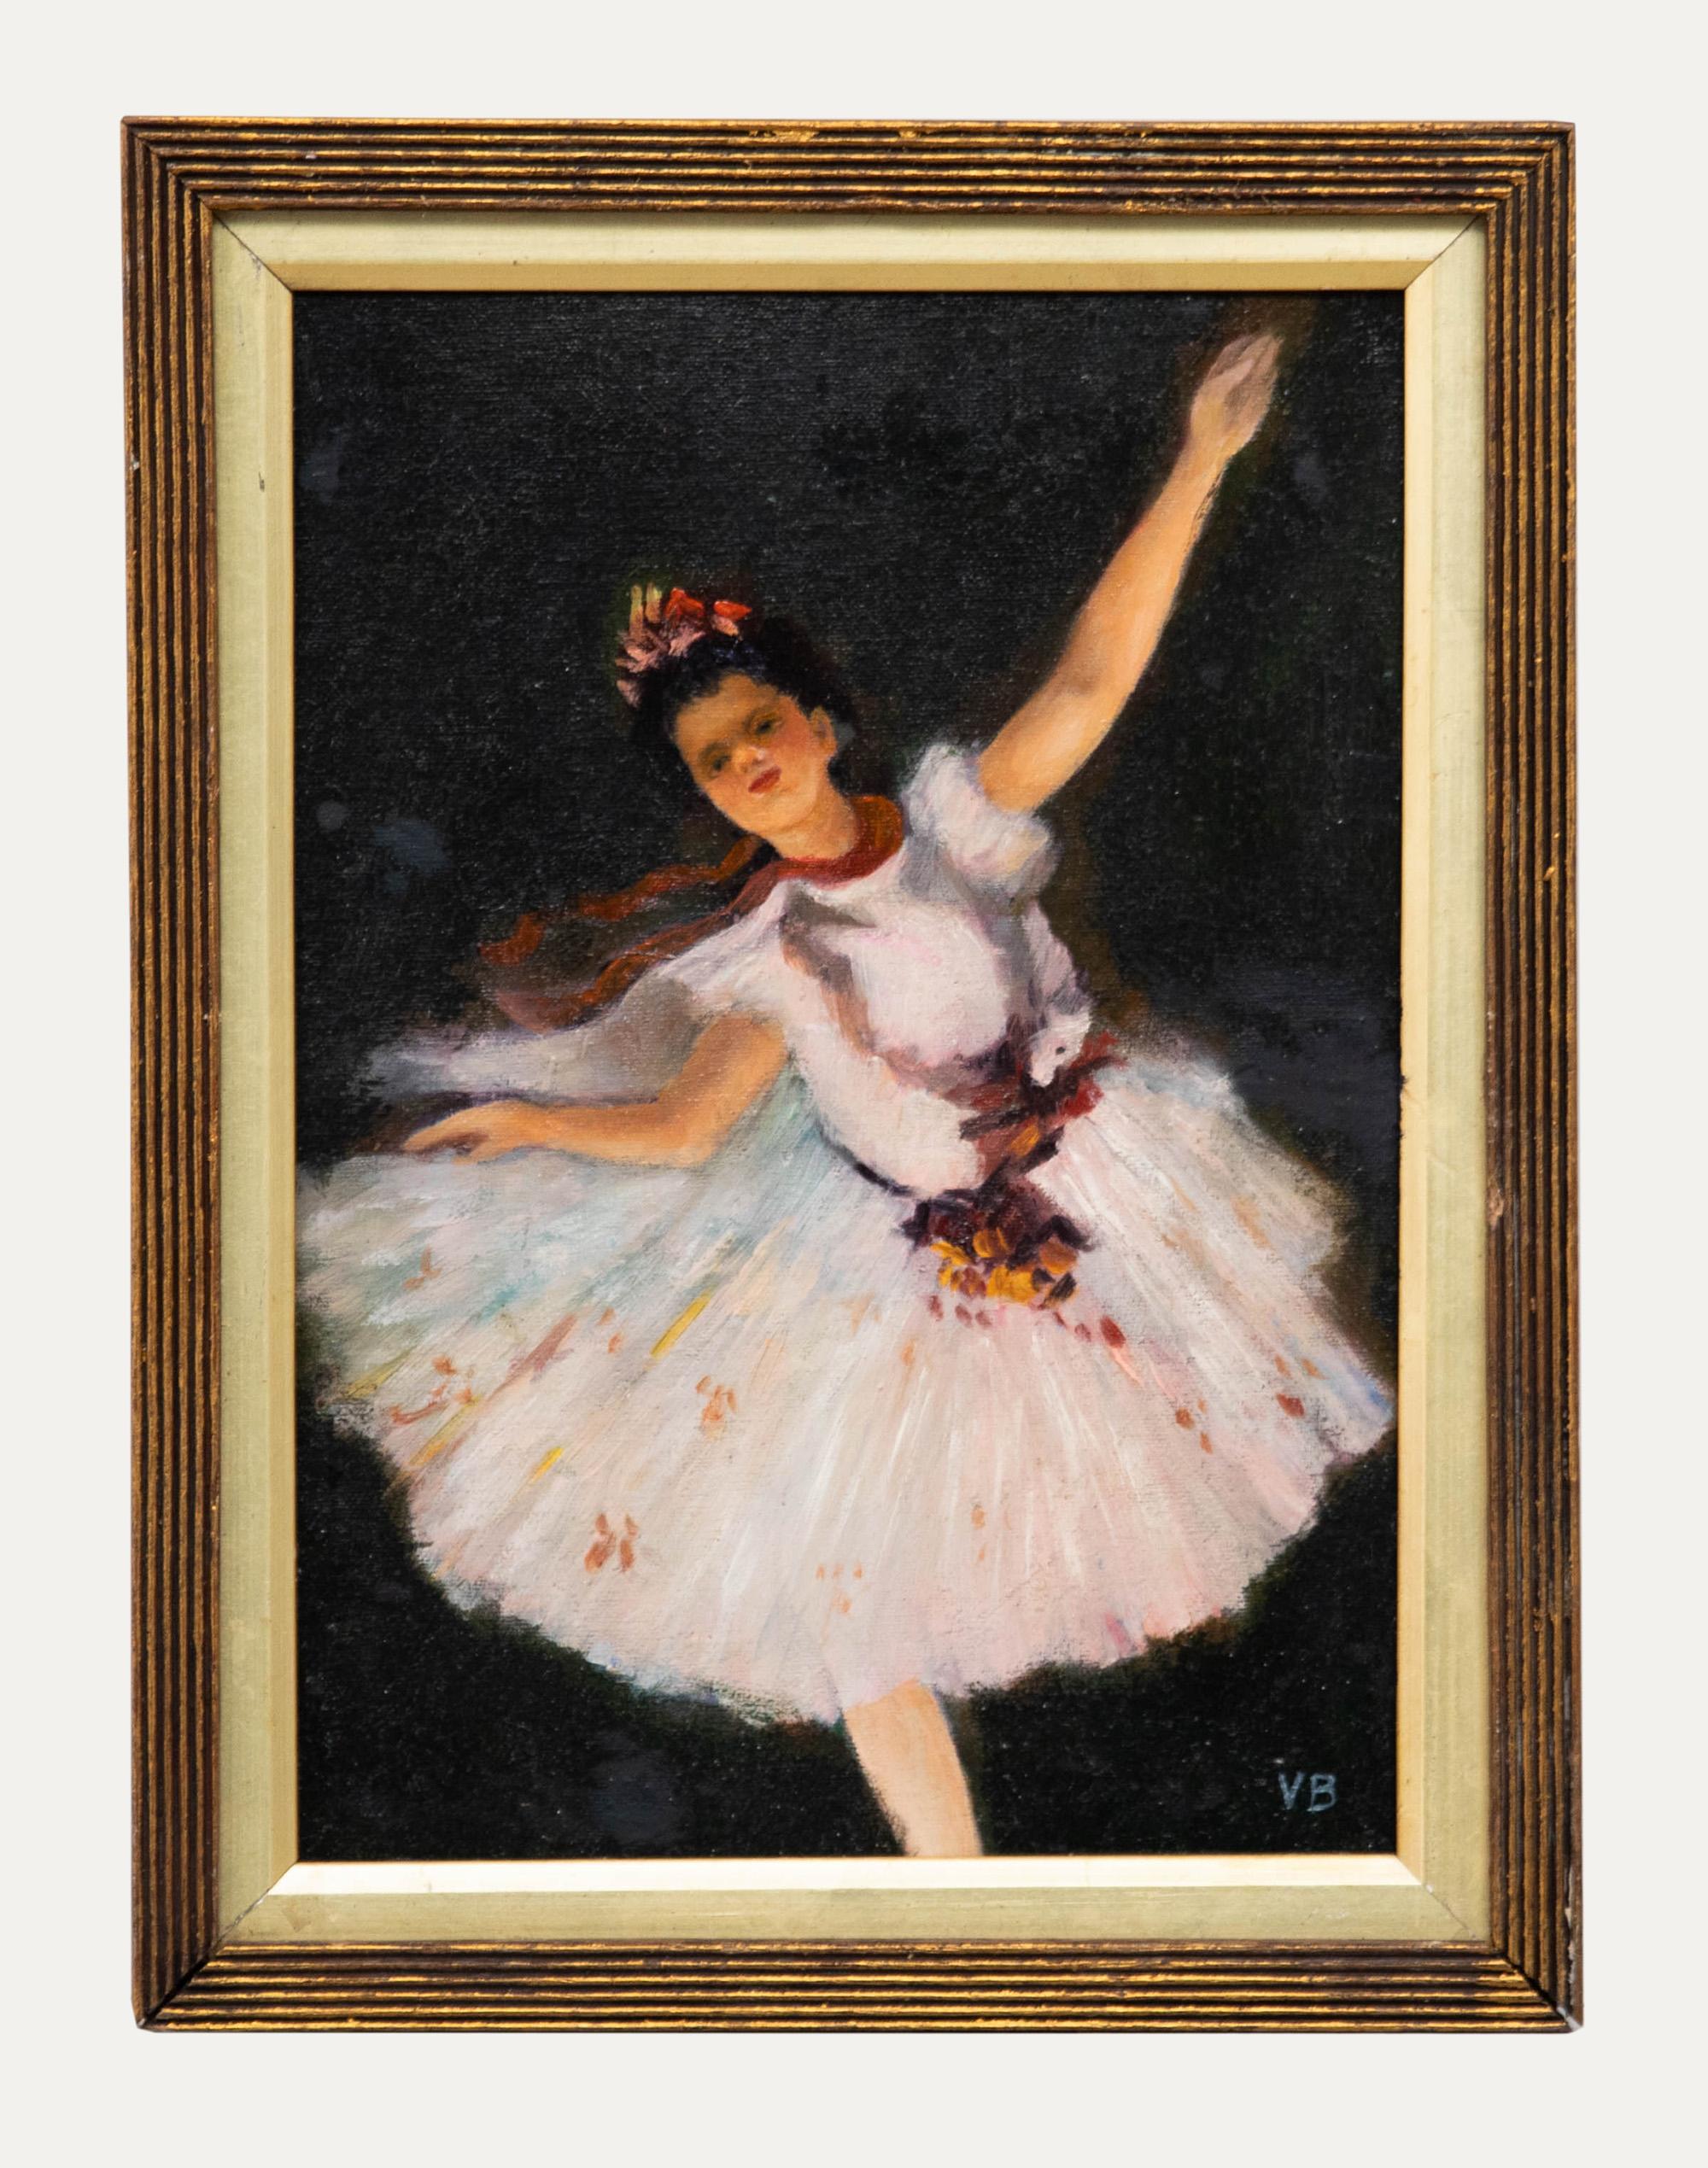 Unknown Portrait Painting - After Edgar Degas - Framed 20th Century Oil, Star Dancer (On Stage)